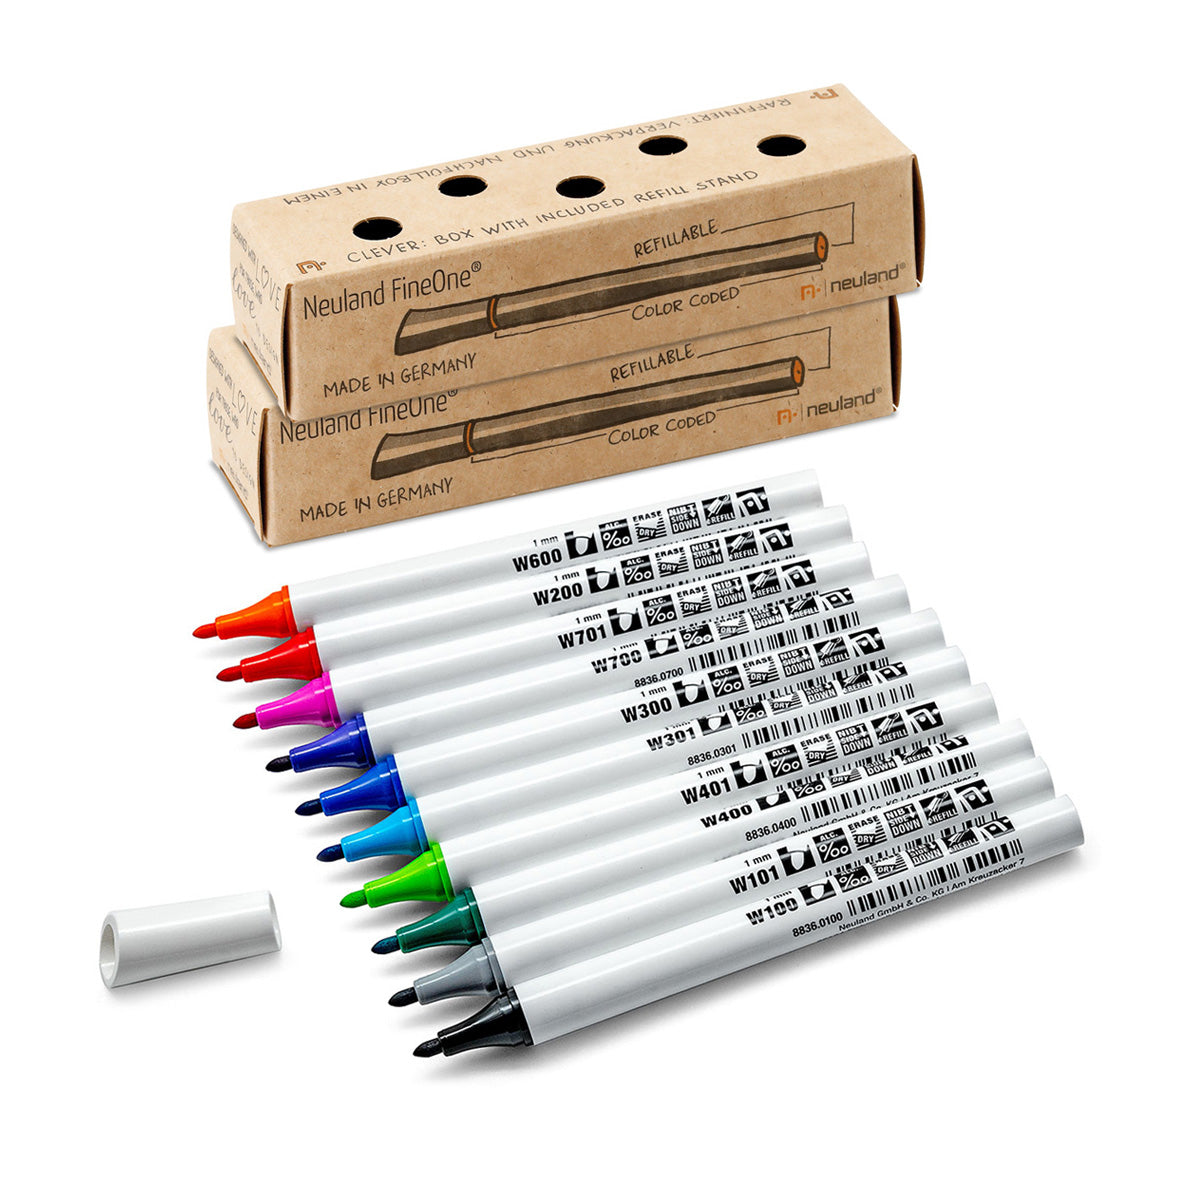 Neuland FineOne® Whiteboard – complete bundle of 10